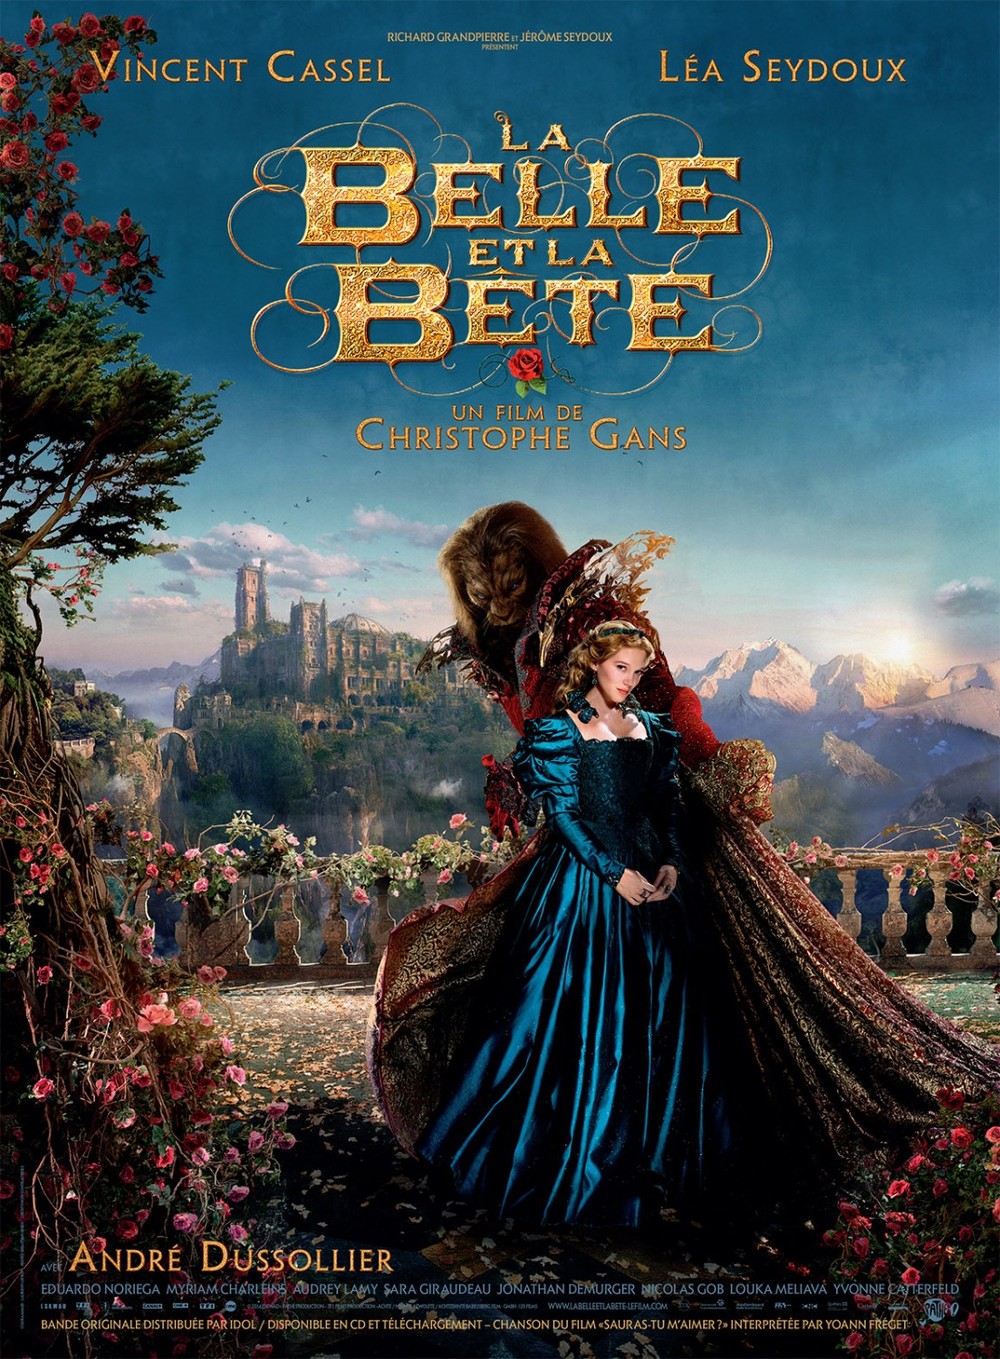 Disneys Beauty and the Beast | Life Lessons from LeFou